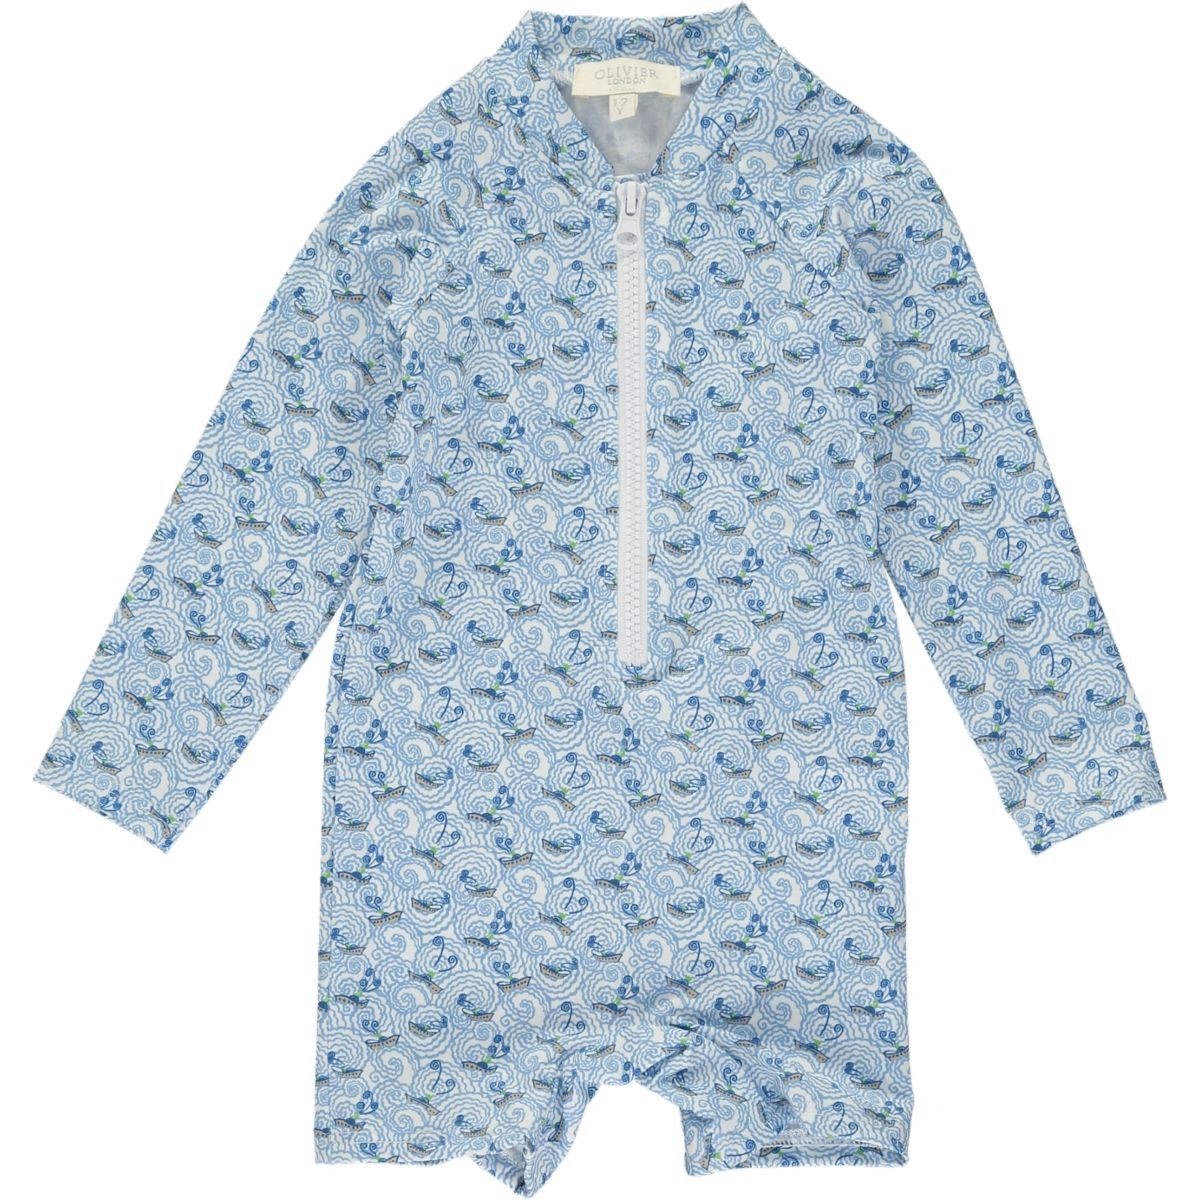 OLIVIER BABY AND KIDS Boys Rash Suit